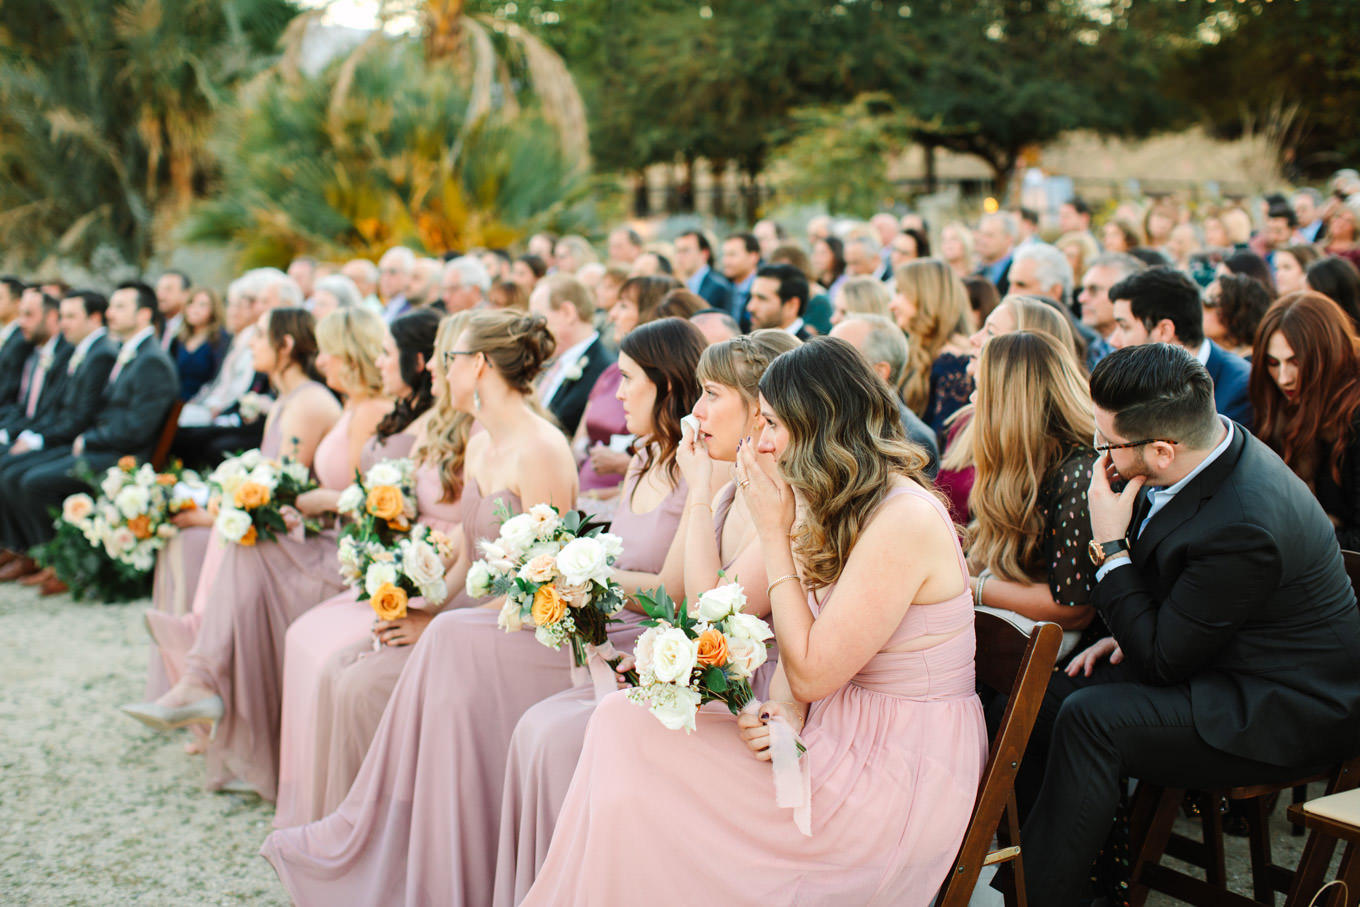 Candid of bridesmaids during wedding ceremony | Living Desert Zoo & Gardens wedding with unique details | Elevated and colorful wedding photography for fun-loving couples in Southern California |  #PalmSprings #palmspringsphotographer #gardenwedding #palmspringswedding  Source: Mary Costa Photography | Los Angeles wedding photographer 